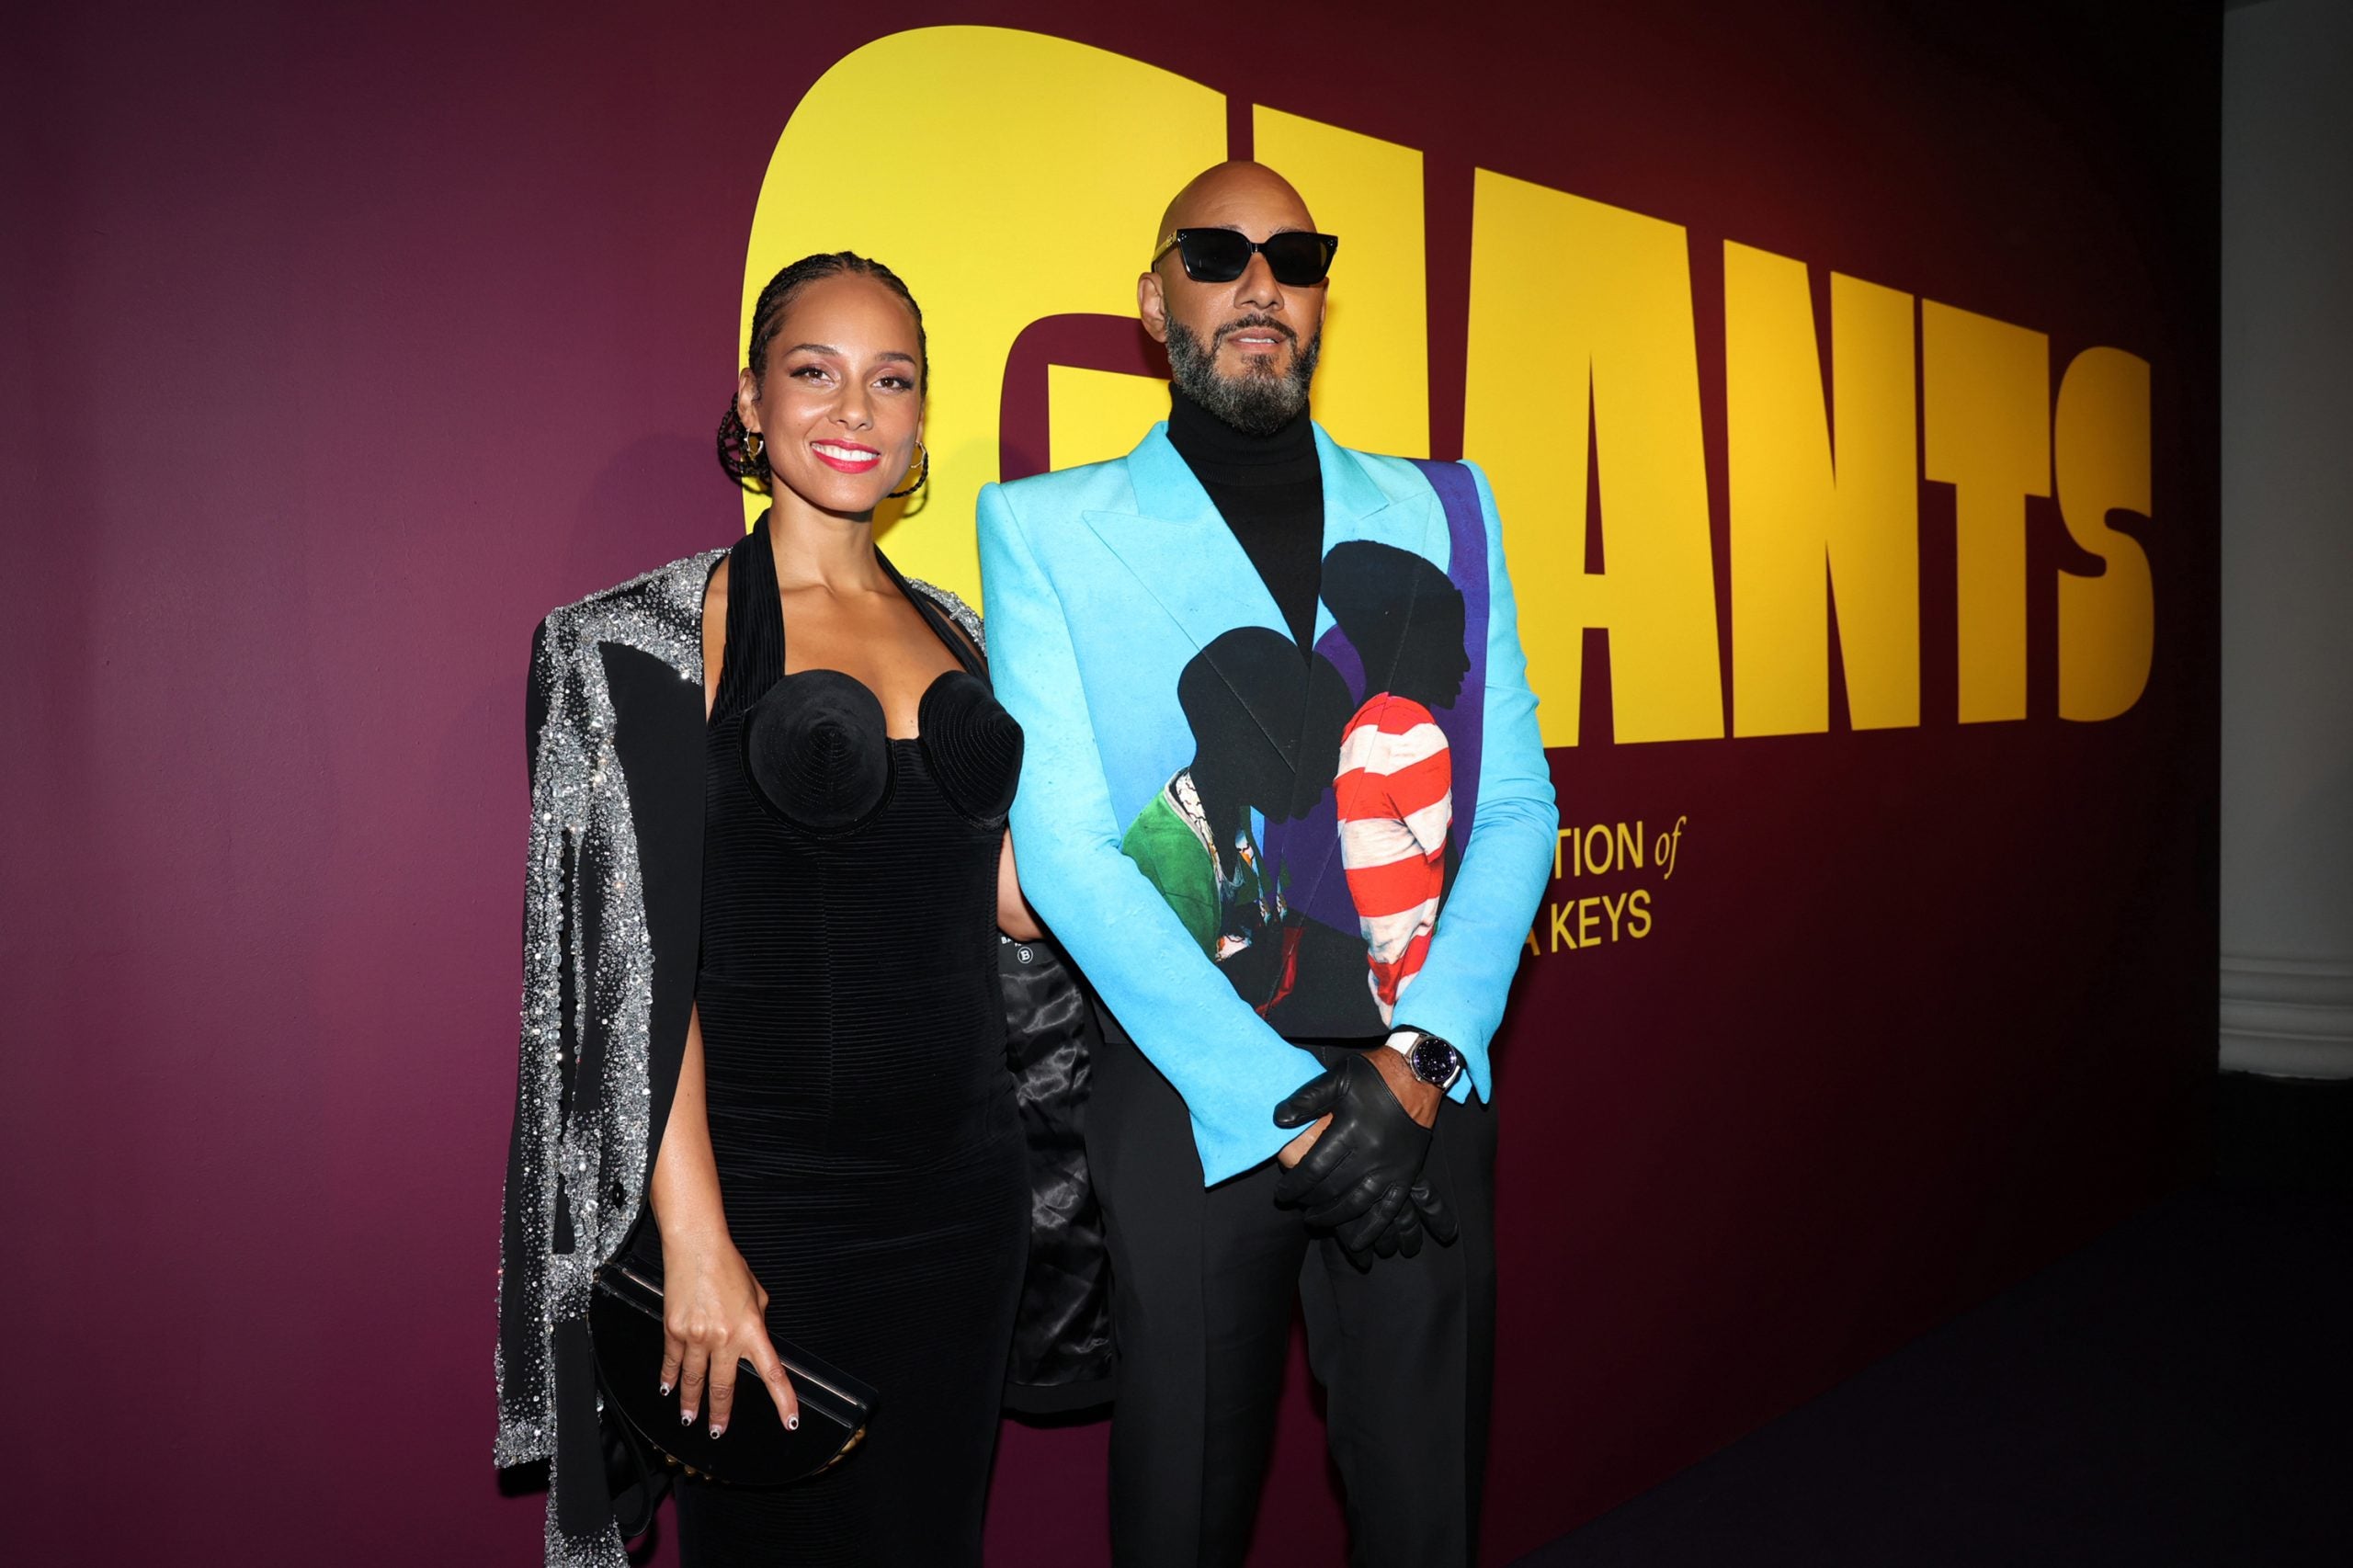 Alicia Keys And Swizz Beatz’ Exhibition ‘Giants’ Is A Feat Of High-Concept Outreach